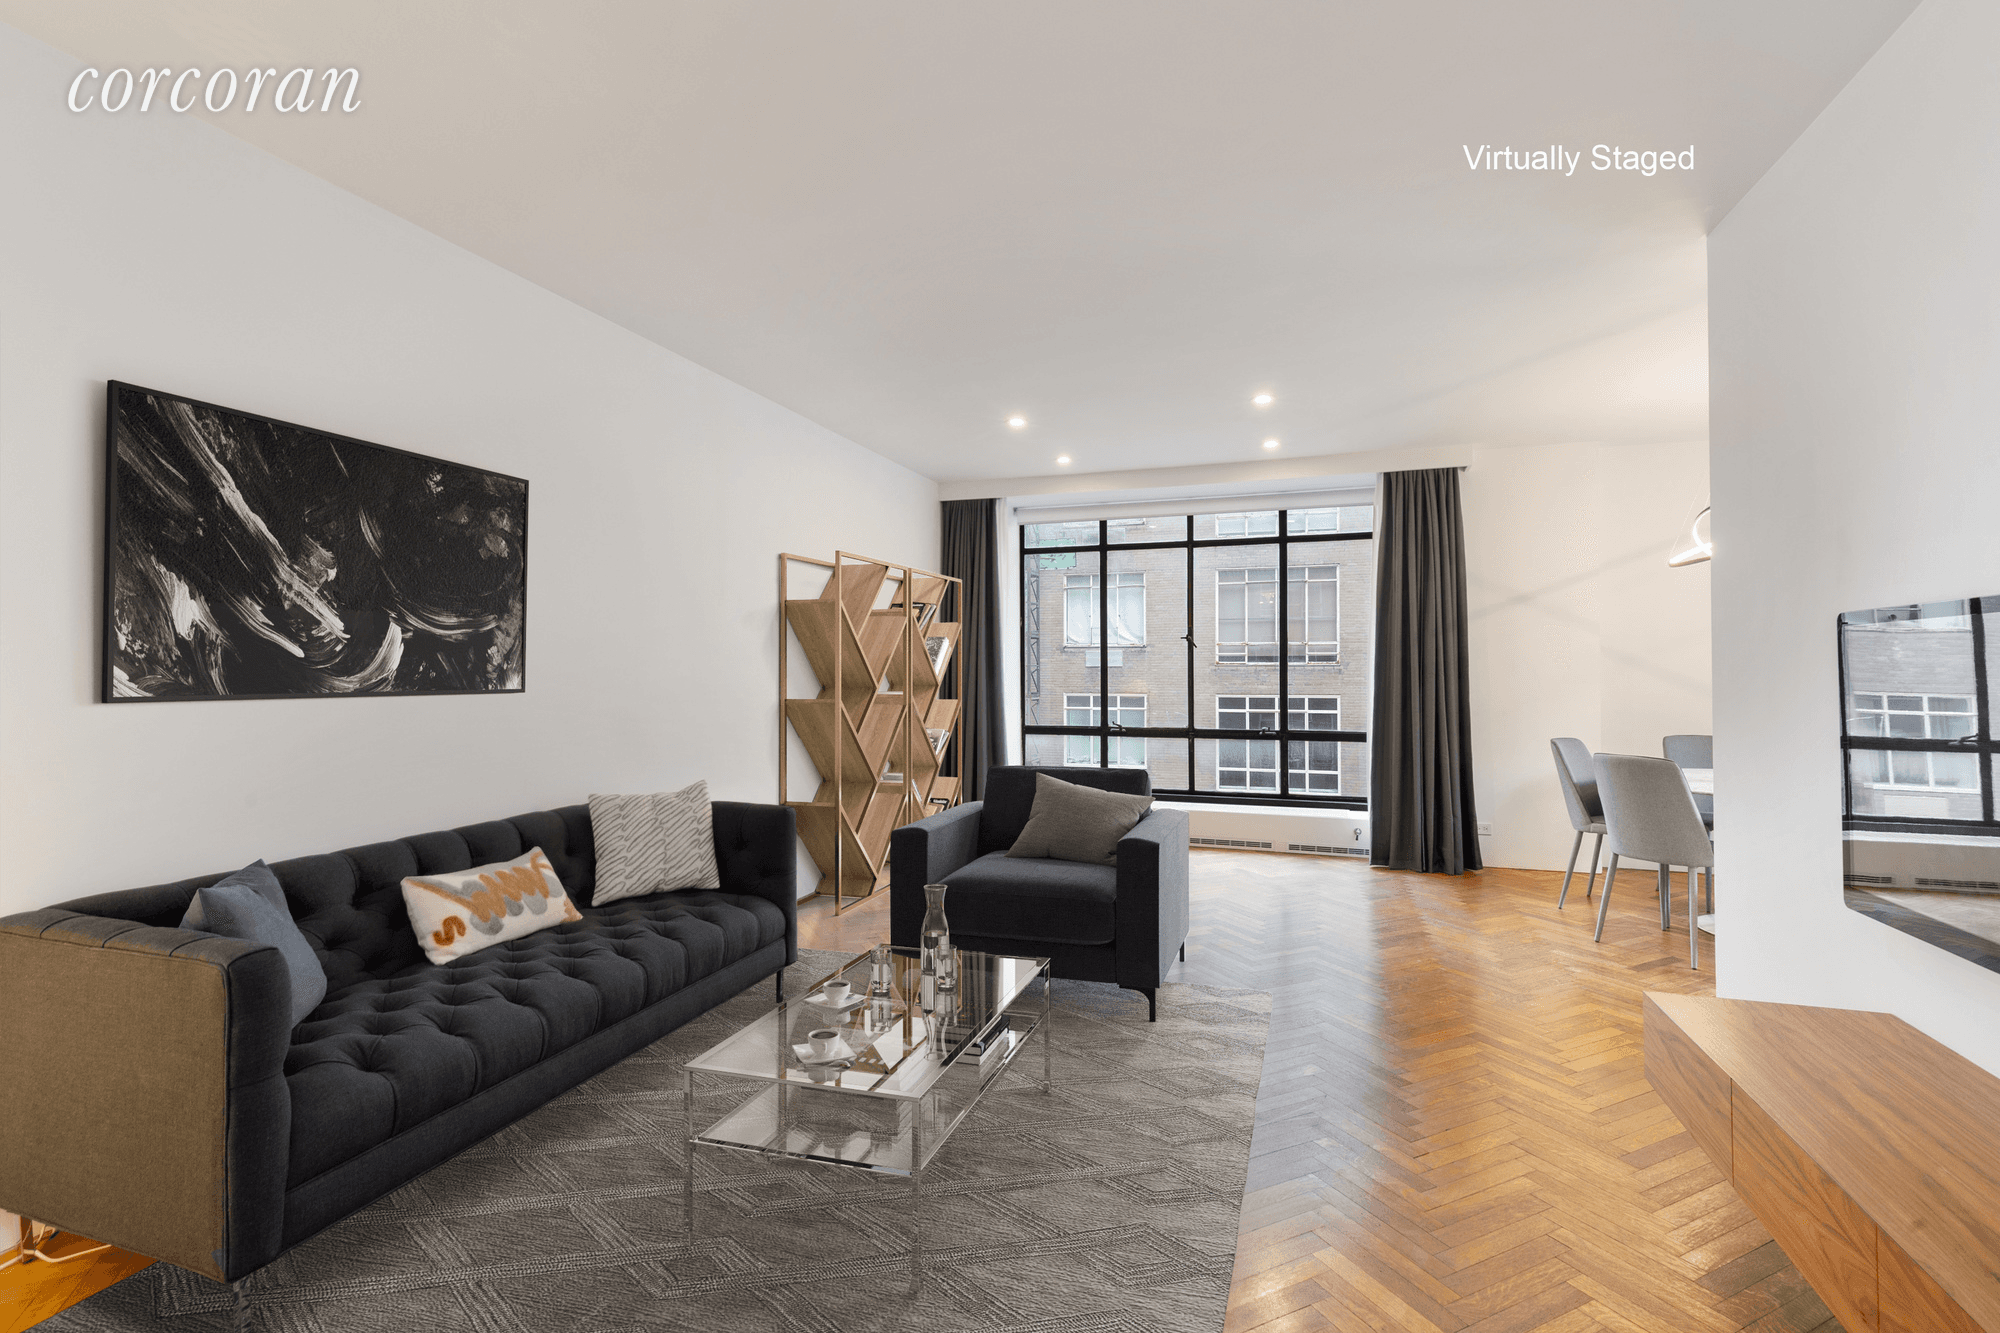 Apt. 9F at 17 West 54th Street is a serene, large one bedroom in the renown, land marked Rockefeller Apartments facing the courtyard garden, with pond and seating areas between ...